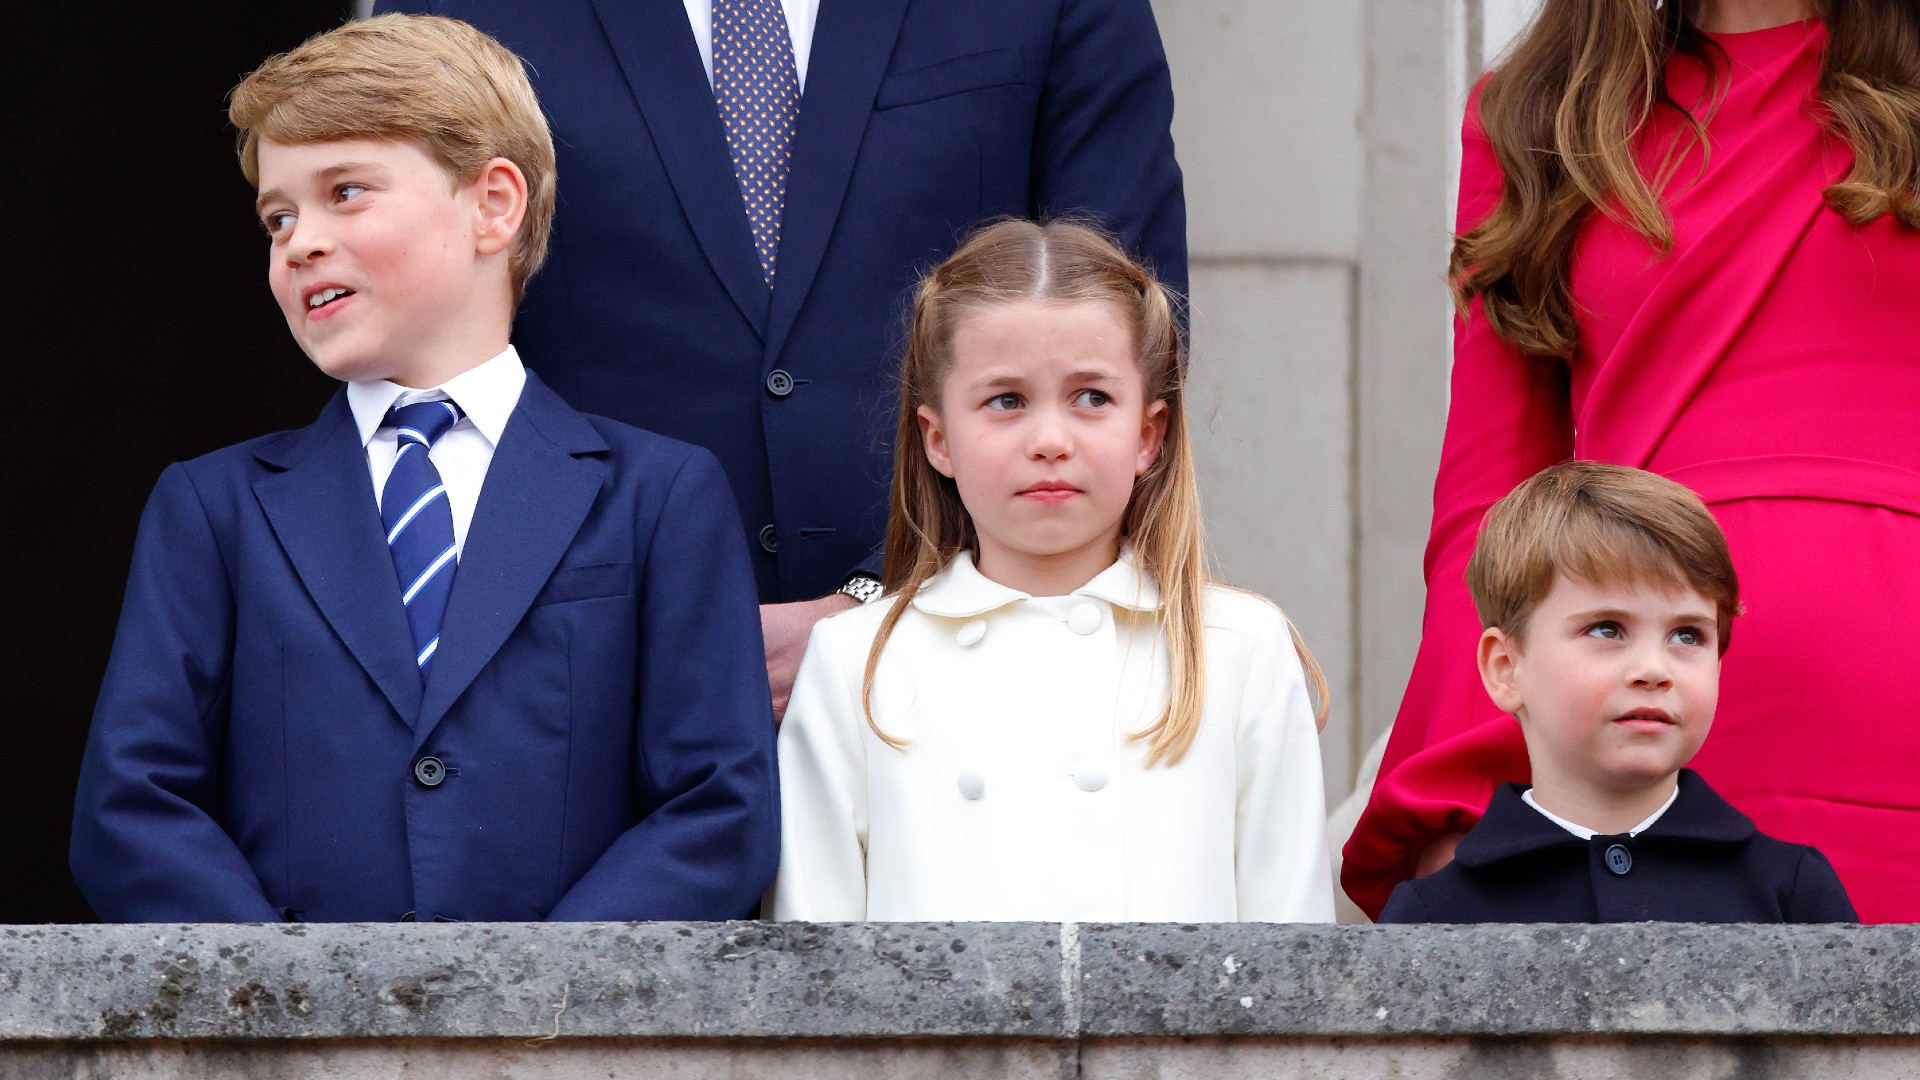 Kate Middleton and Prince William have reportedly banned it as part of their parenting rules

+2023